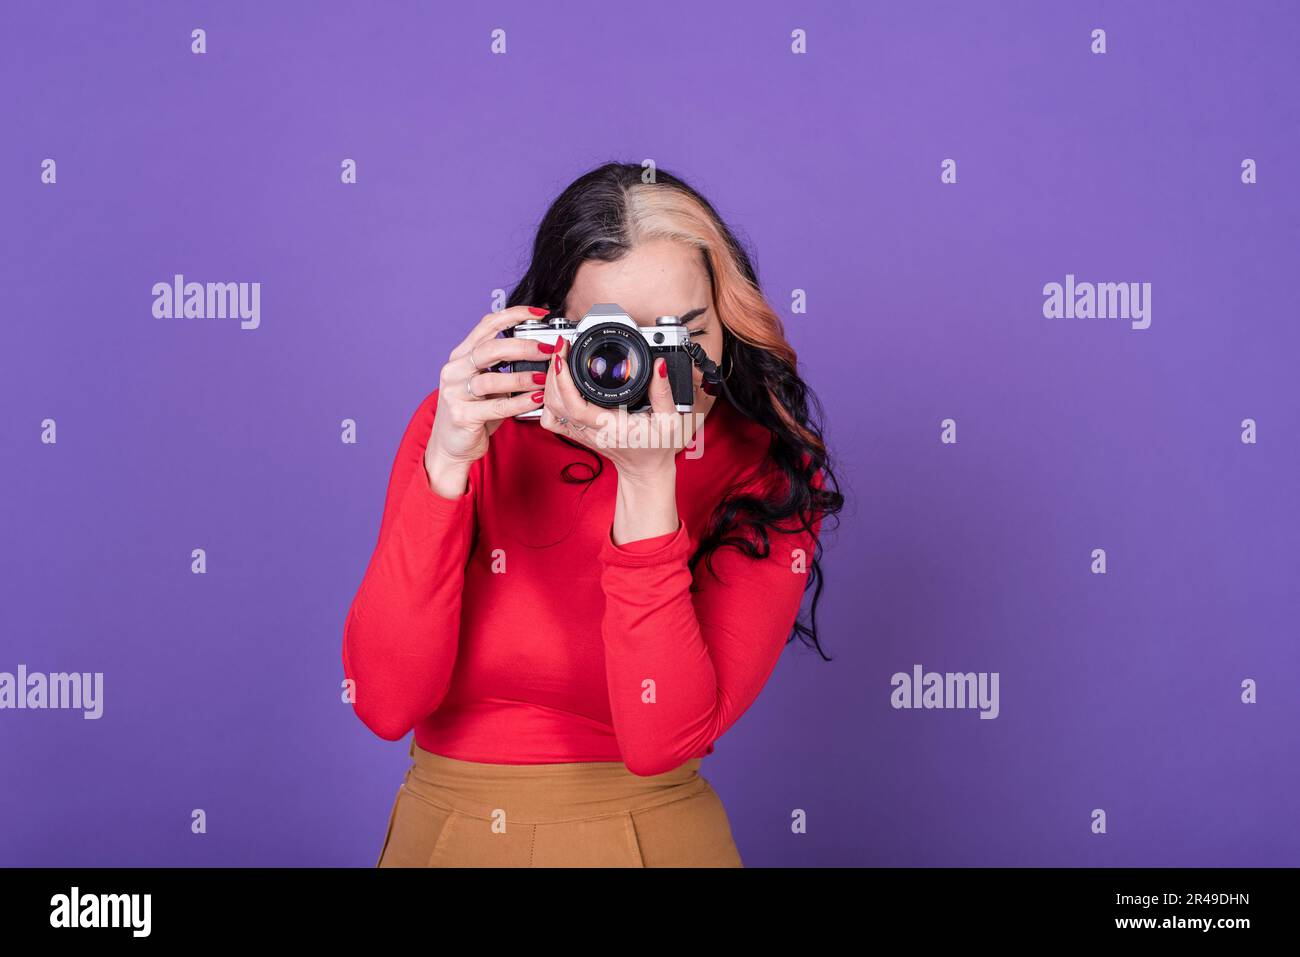 Attractive young lady taking a photo with her film camera over a violet background.  Studio shot. Stock Photo